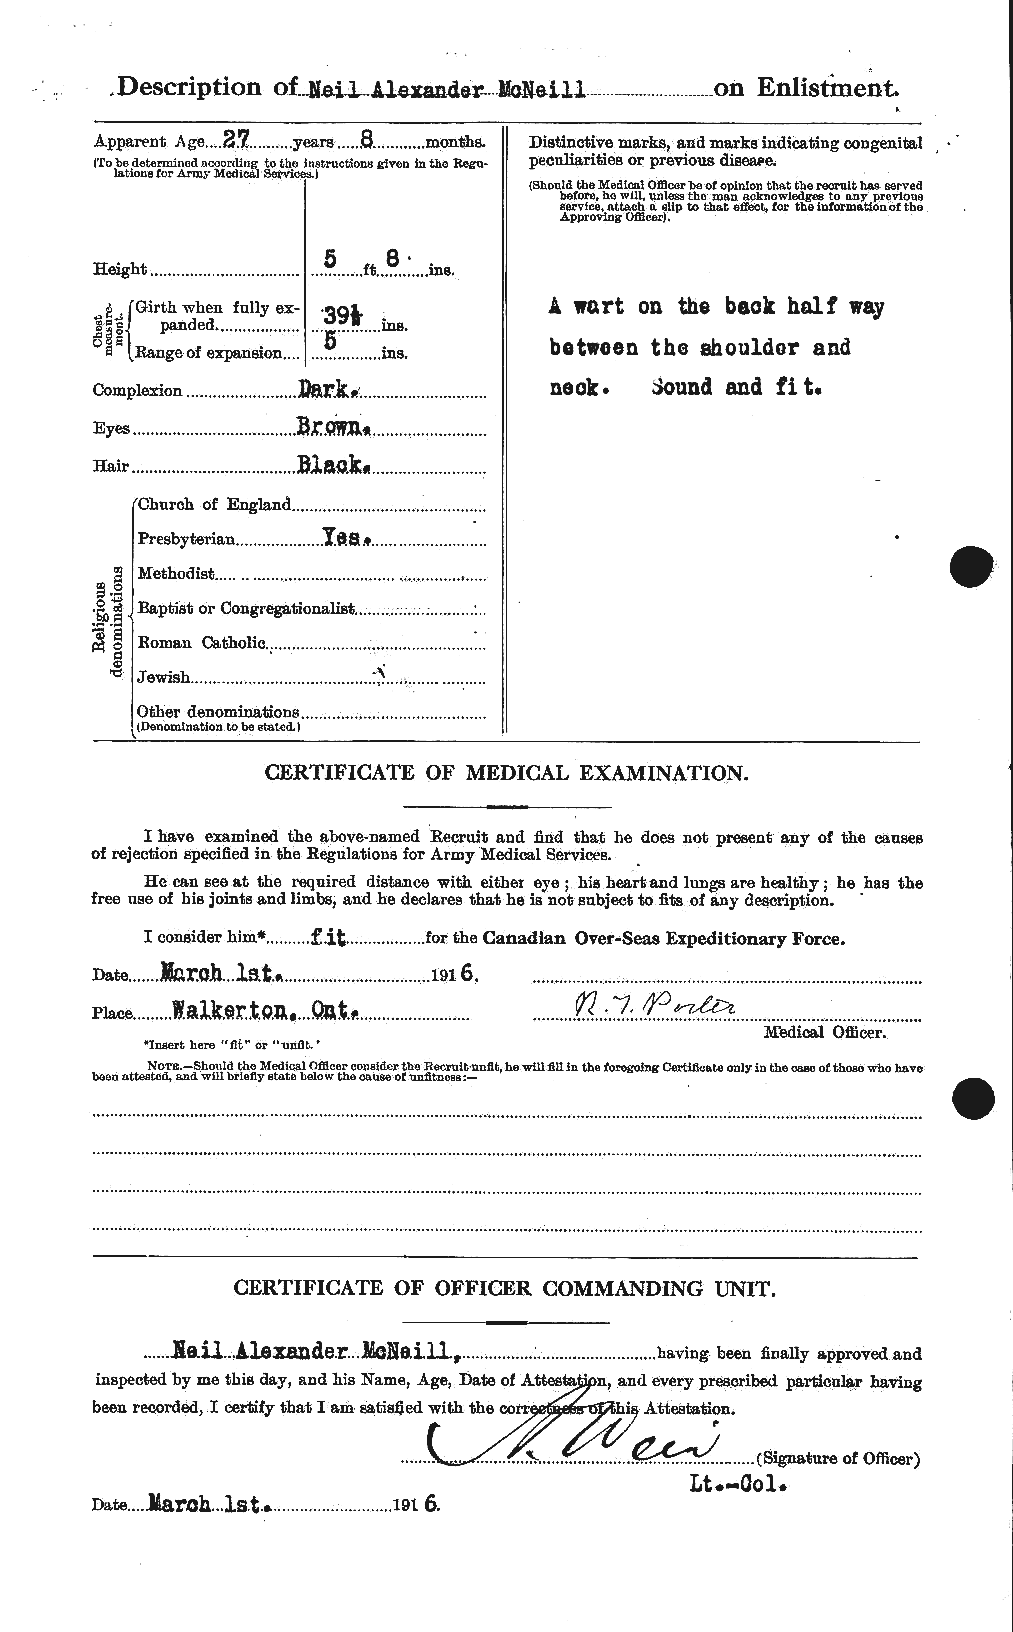 Personnel Records of the First World War - CEF 539010b